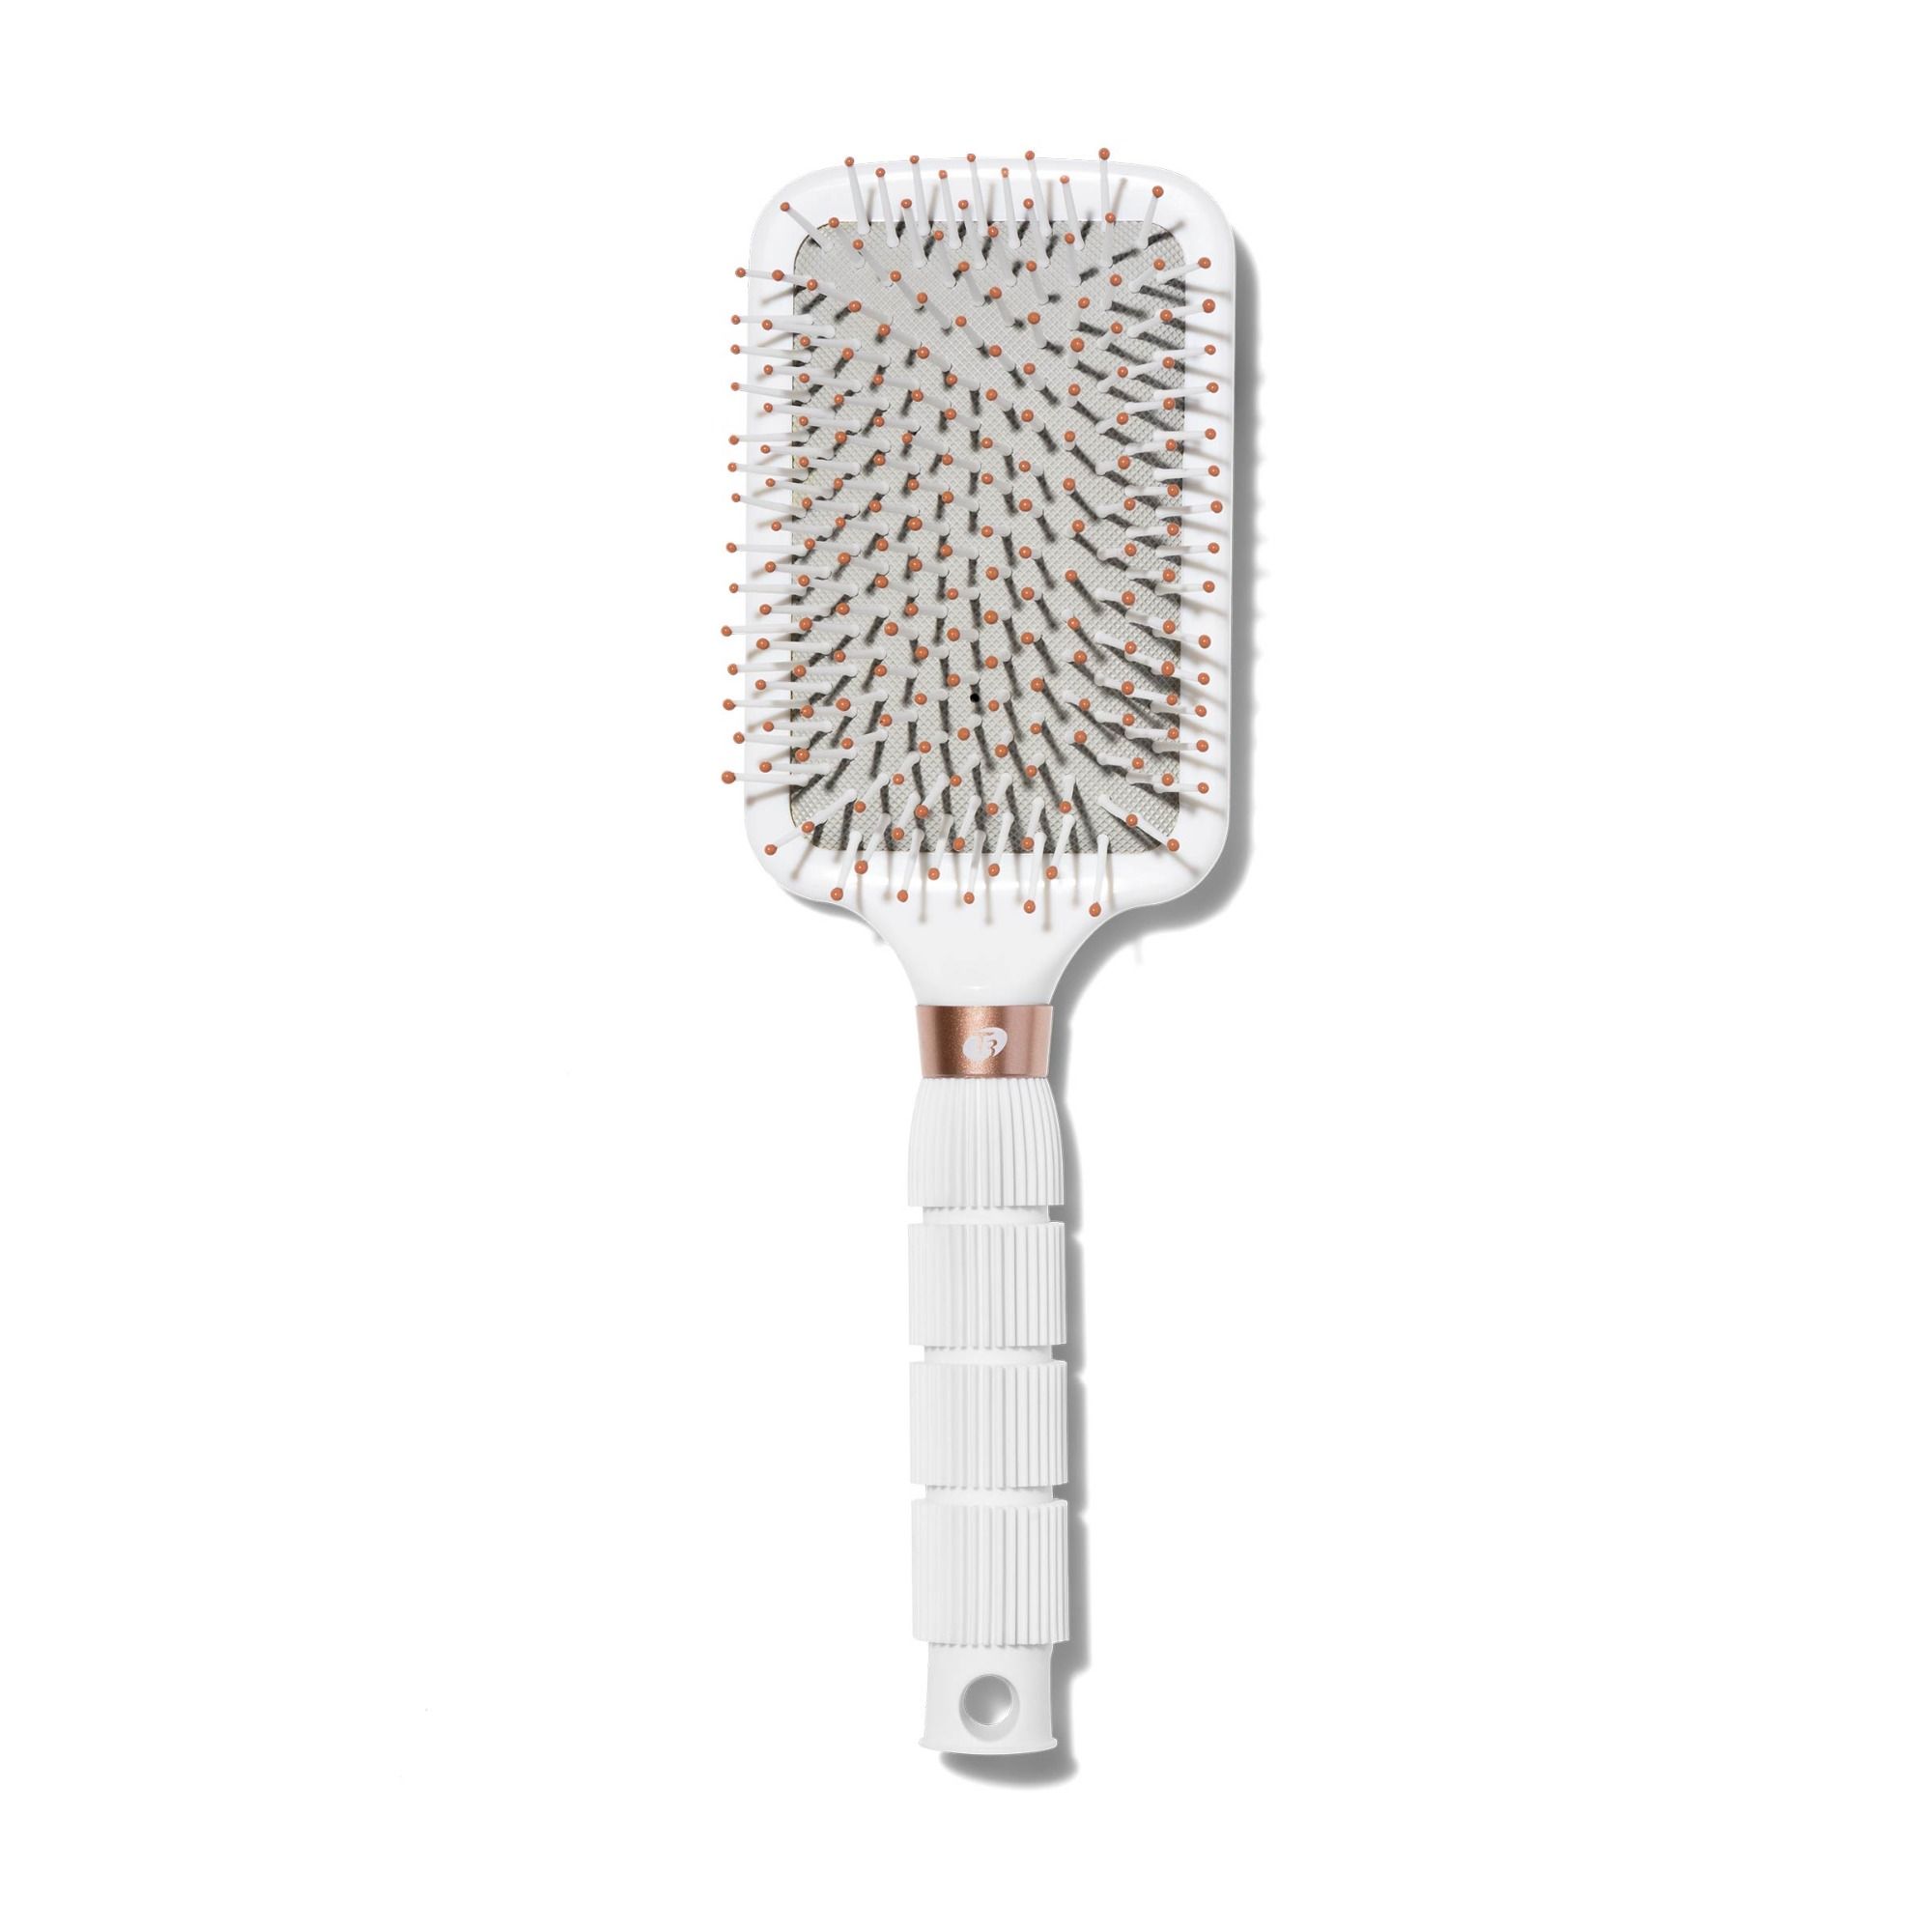 https://www.stylecraze.com/wp-content/uploads/product-images/t3-smooth-paddle-hair-brush_afl3933.jpg